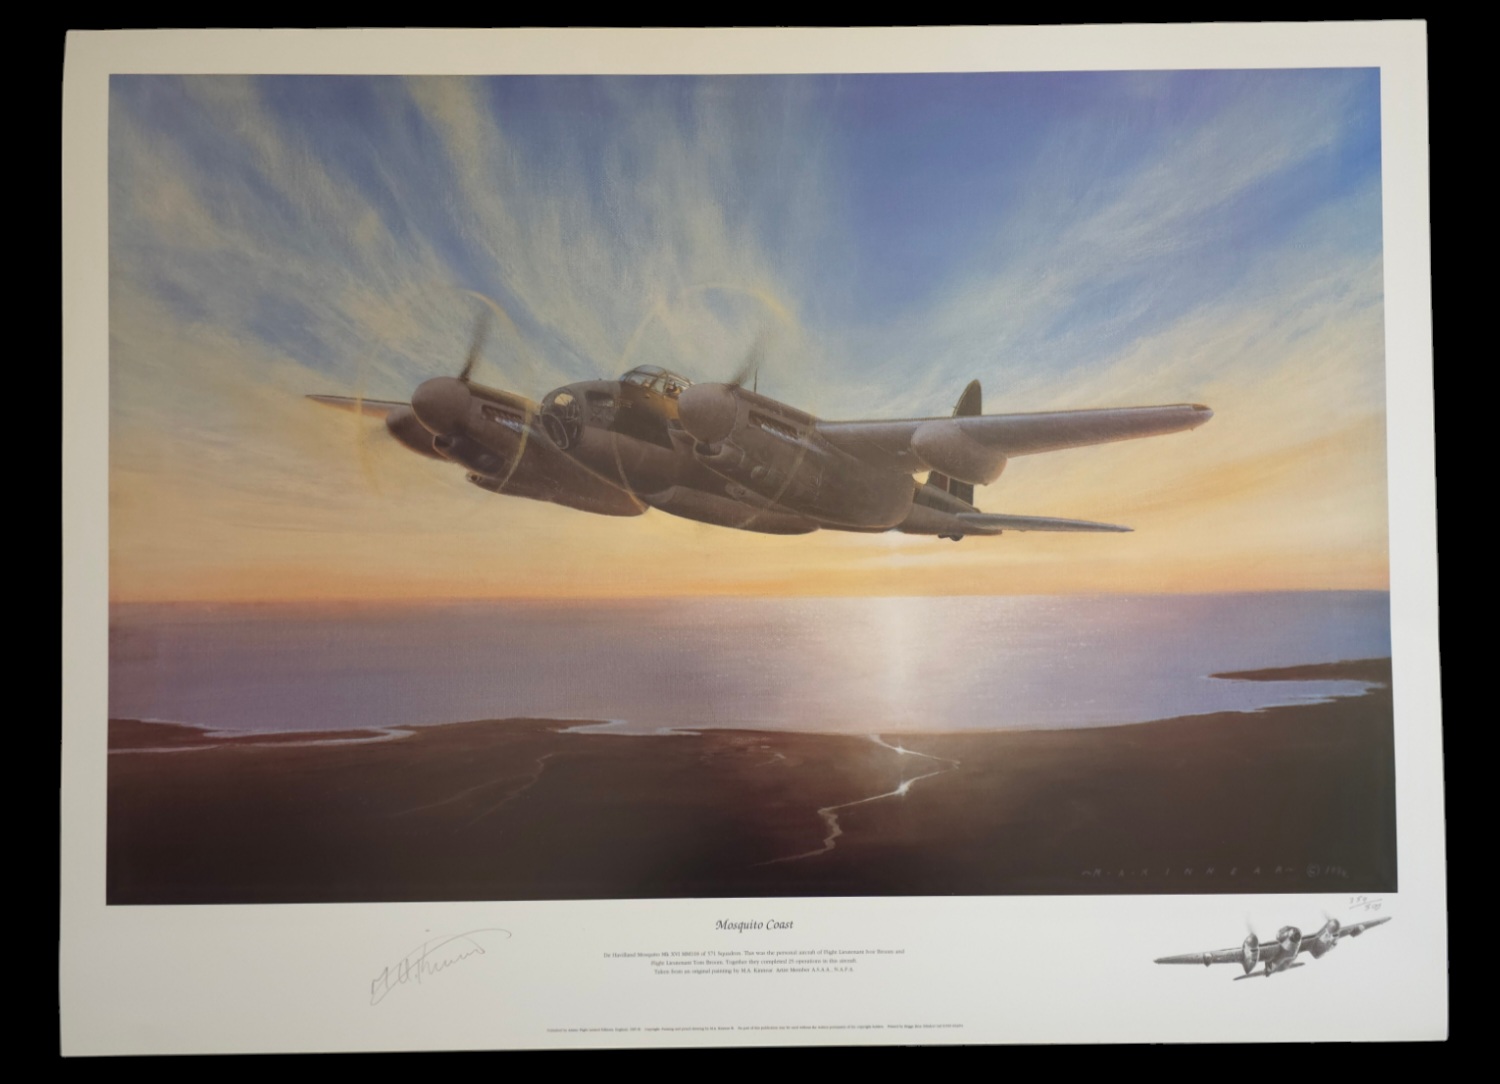 WW2 Colour Print Titled Mosquito Coast by M A Kinnear. signed in pencil by the artist. Measures - Image 2 of 3